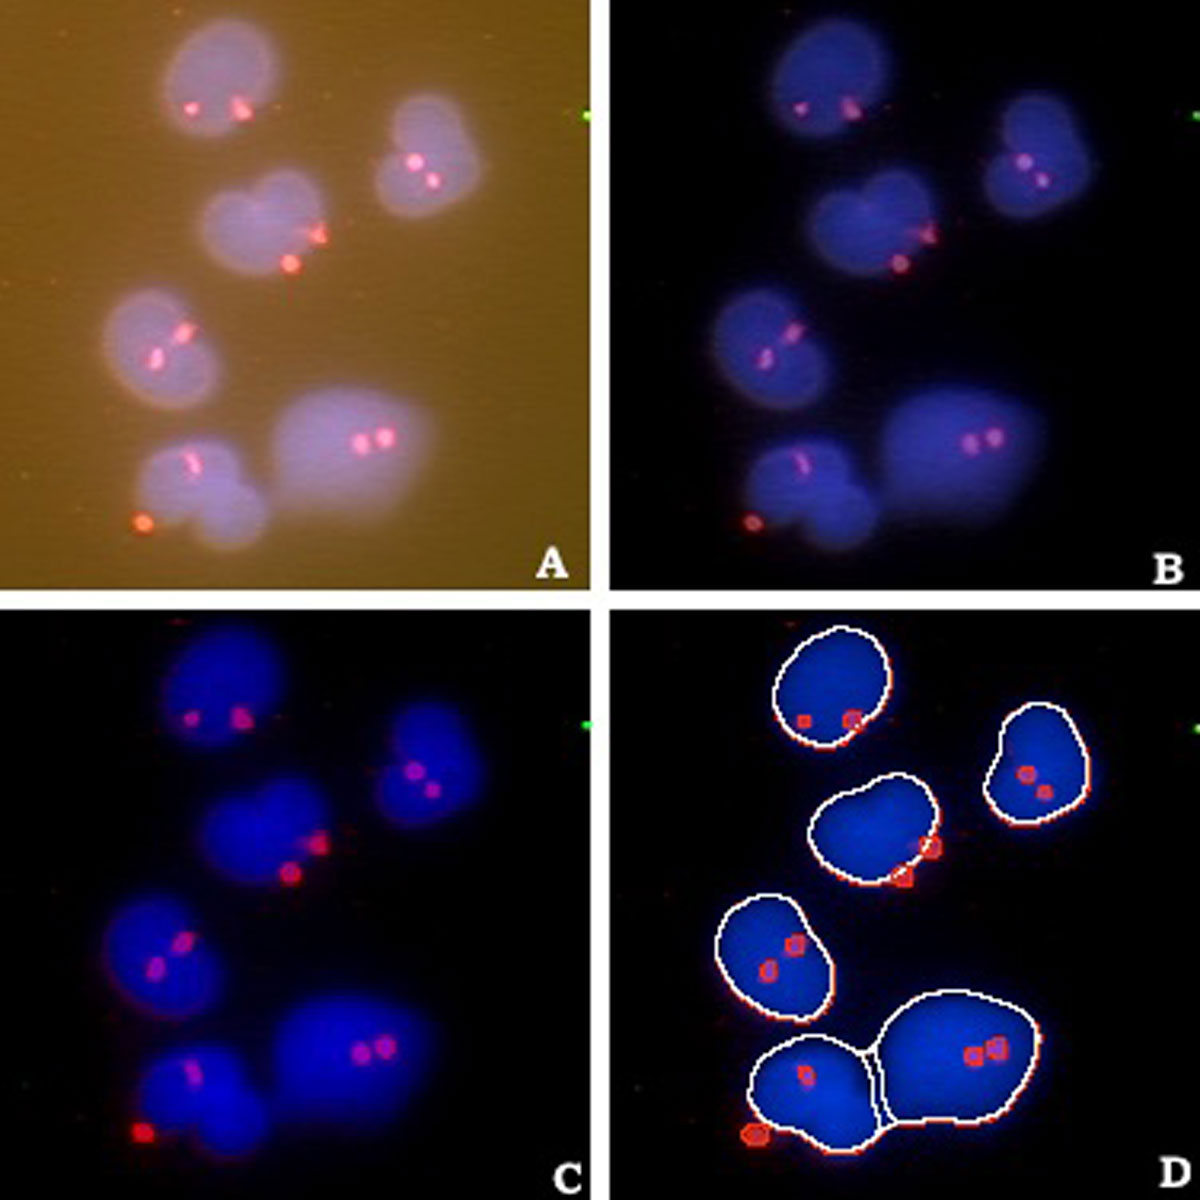 FISH image of 6 female (XX) cells